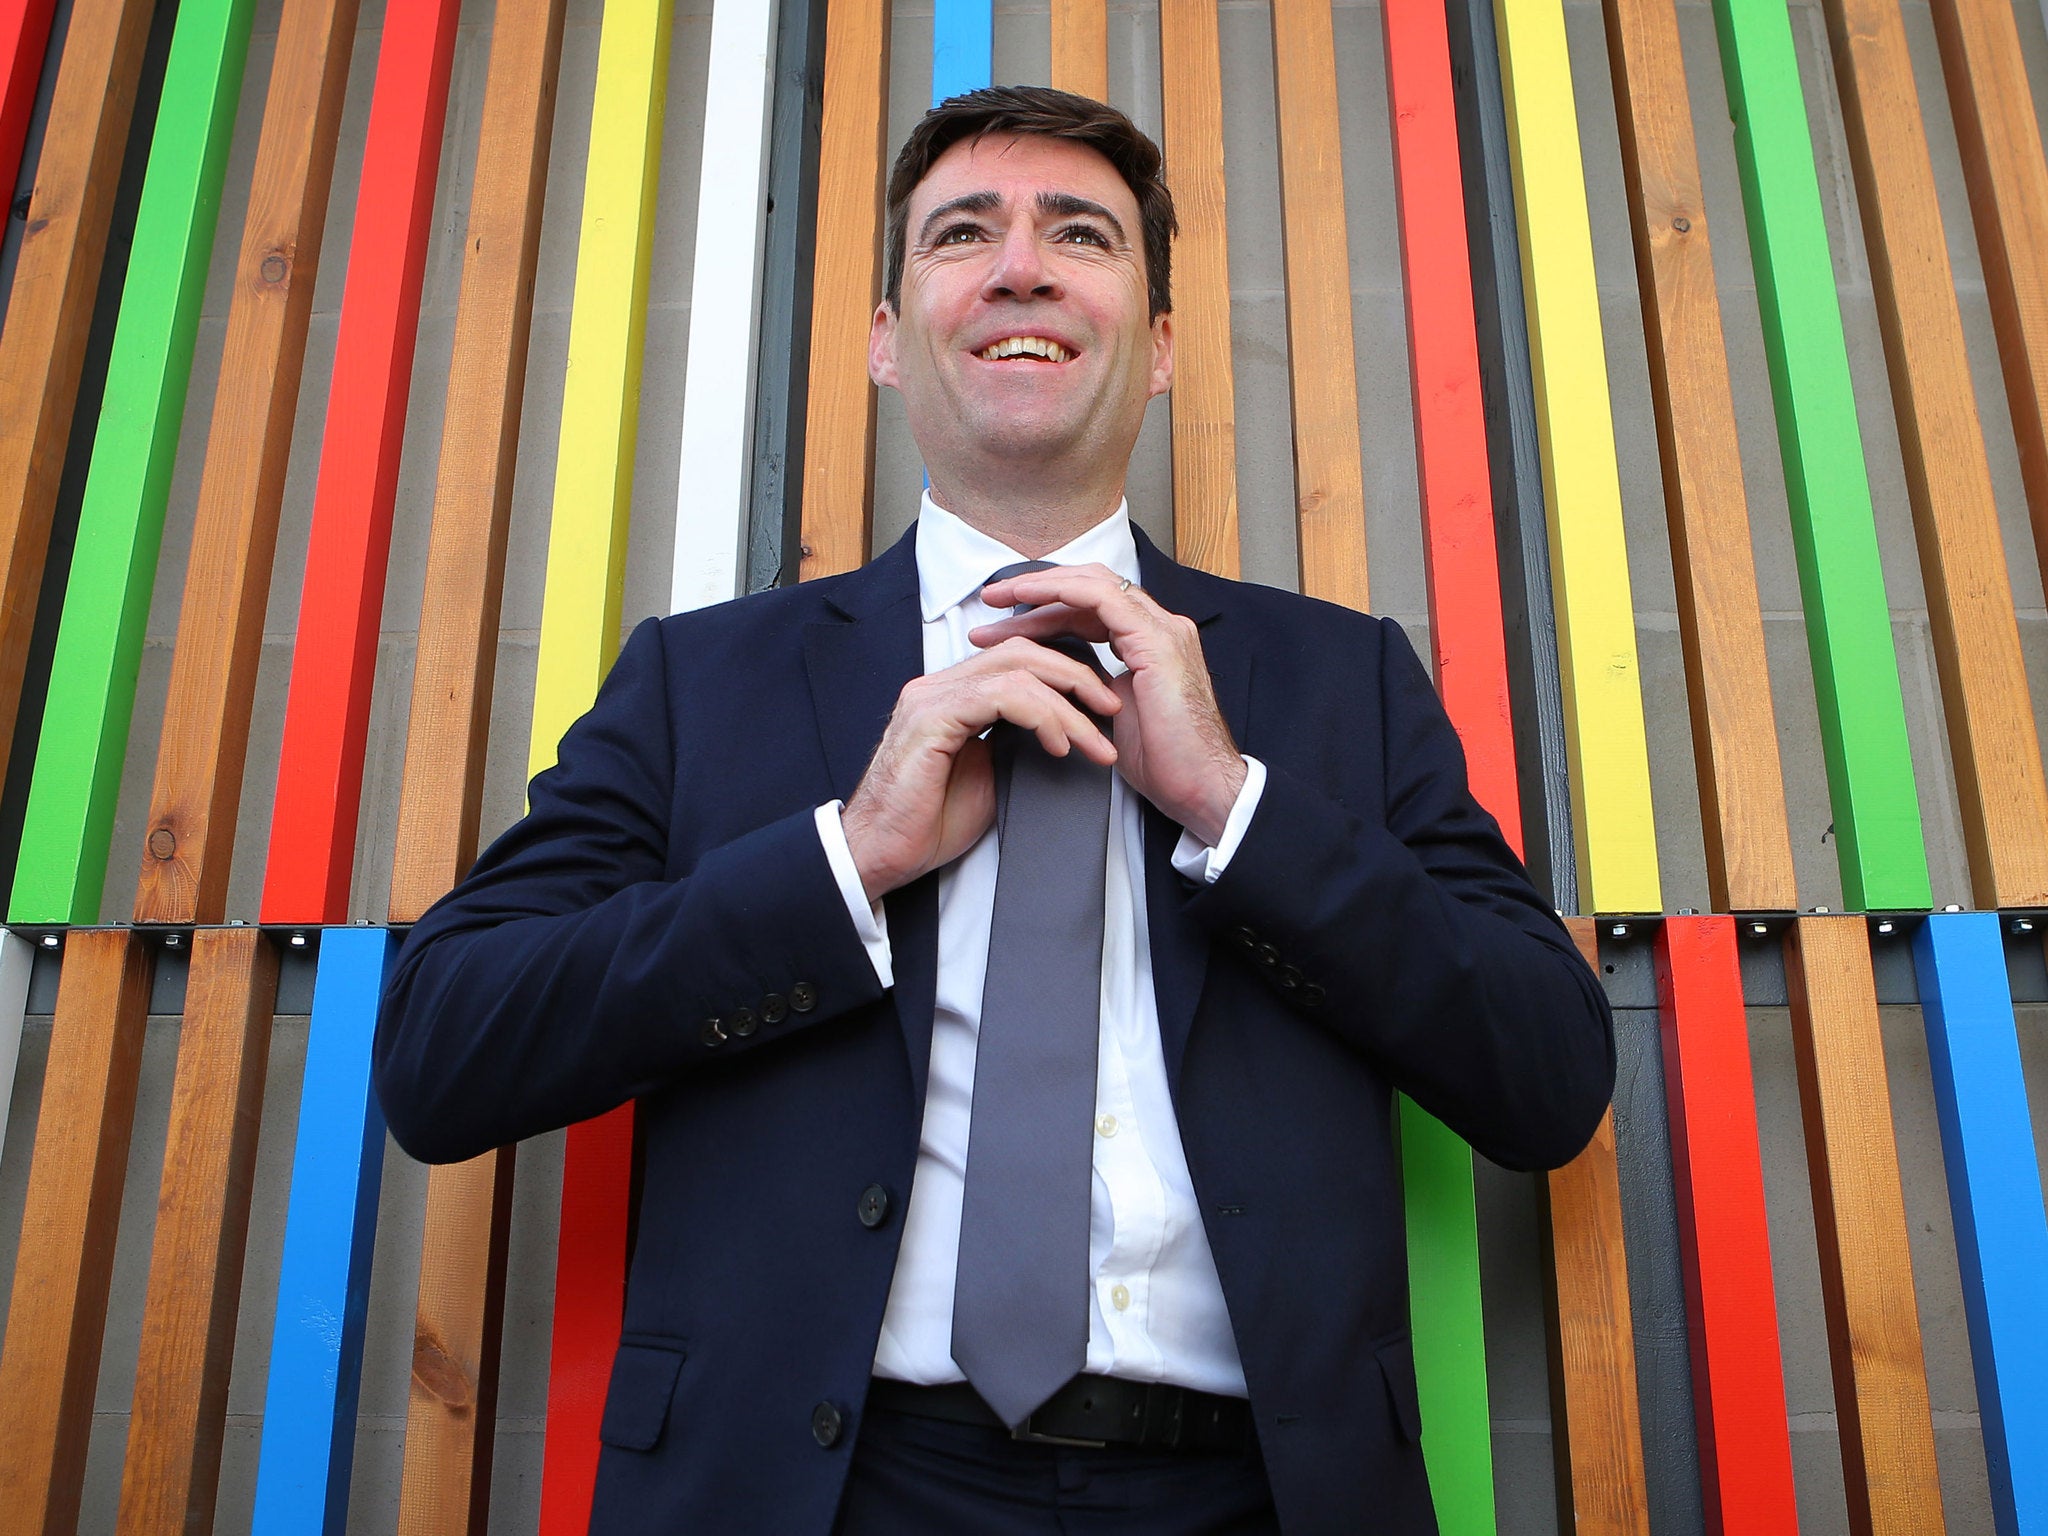 Andy Burnham straightens his tie before a speech in Leeds - but is it Armani or Jaeger